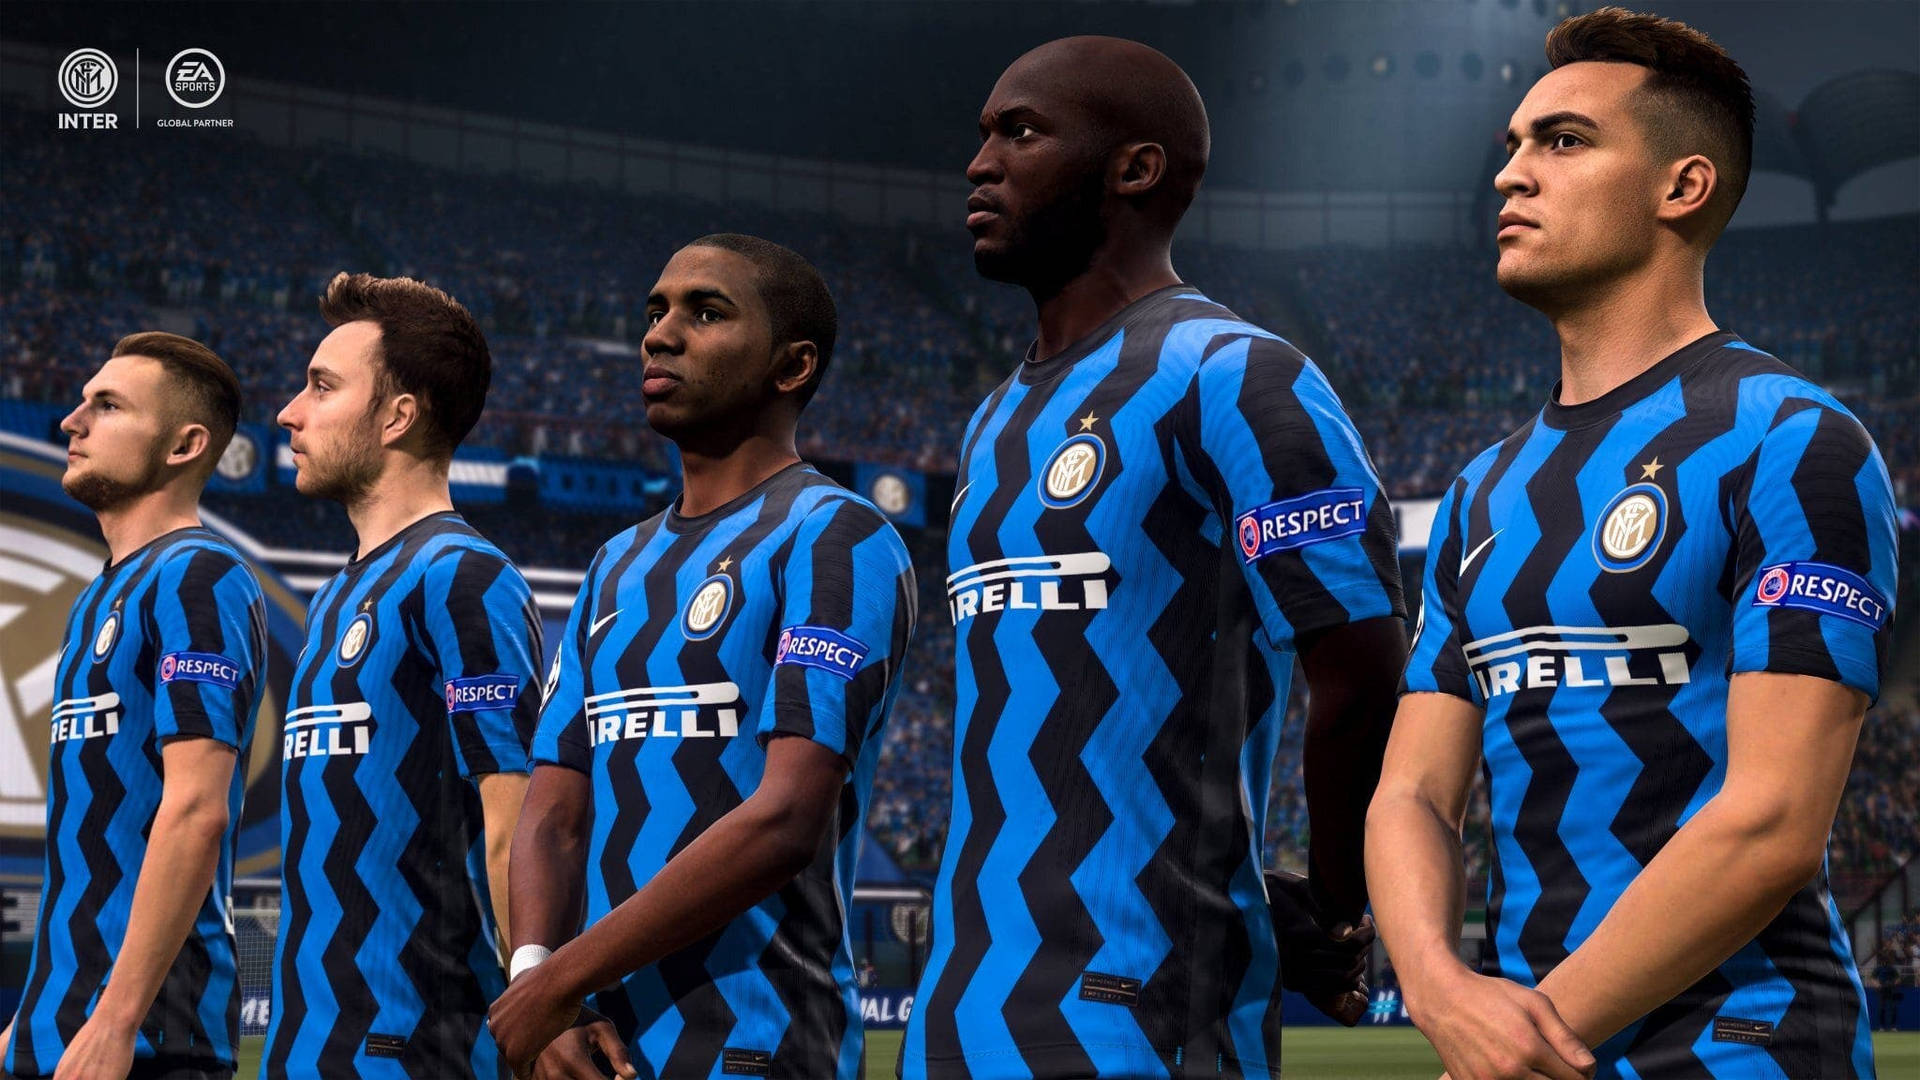 FIFA 21 Football Team Lined Up For National Anthem Wallpaper